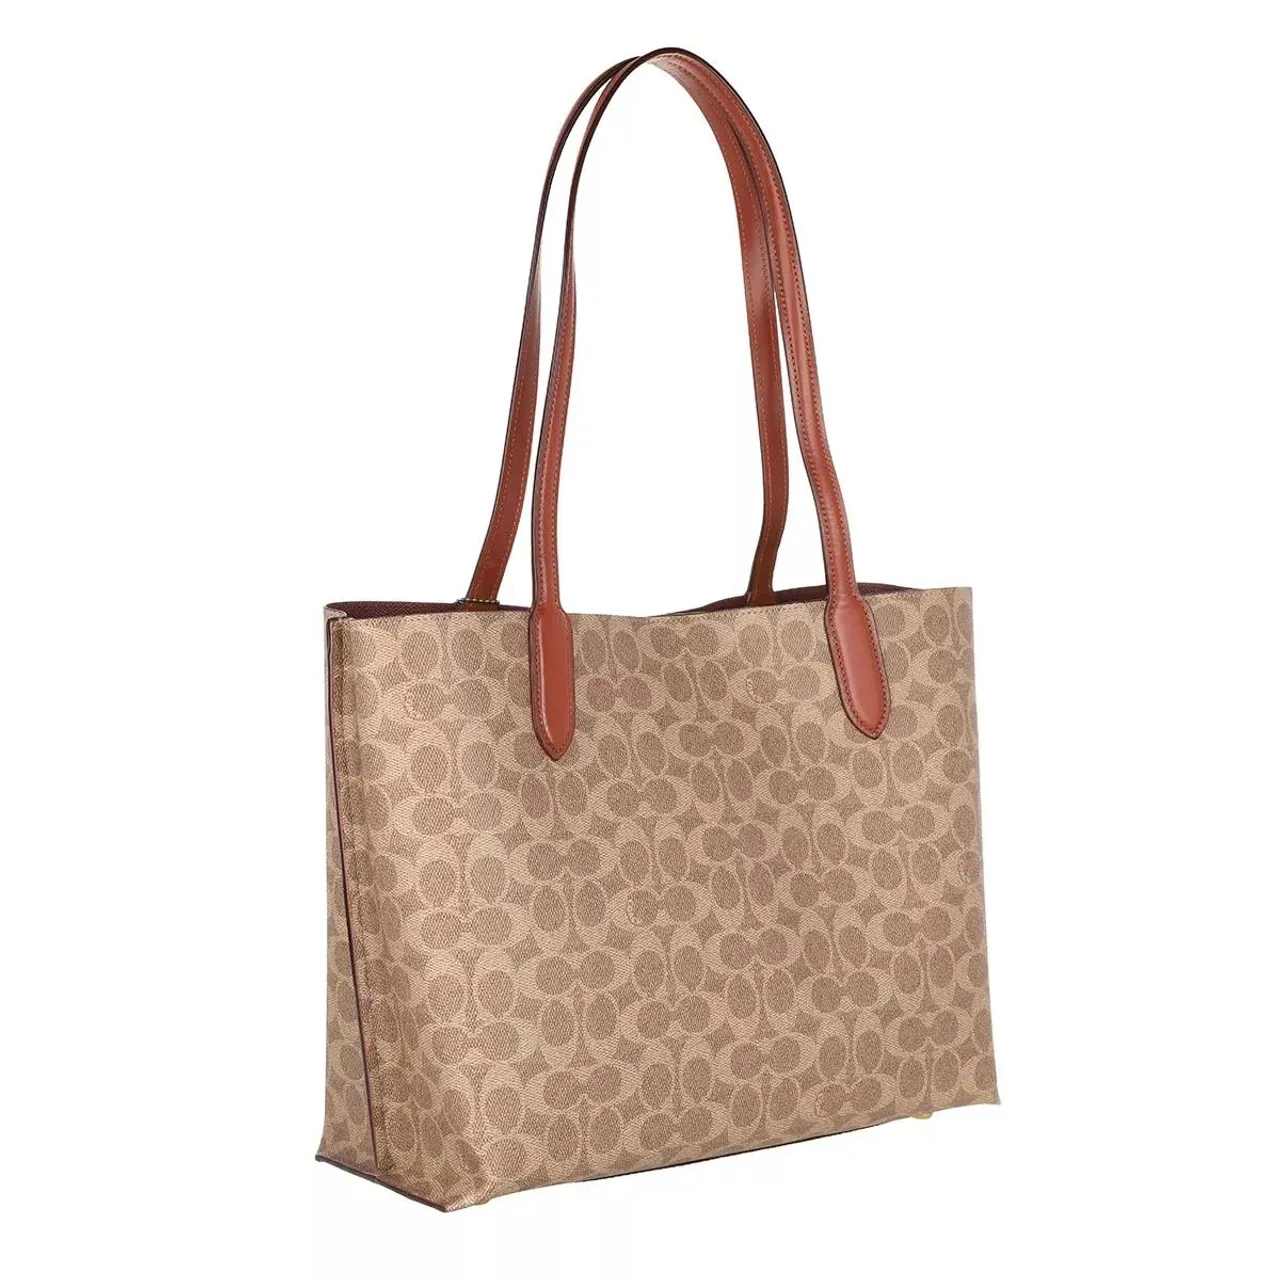 Coach Tote Bags - Coated Canvas Signature Willow Tote - brown - Tote Bags for ladies